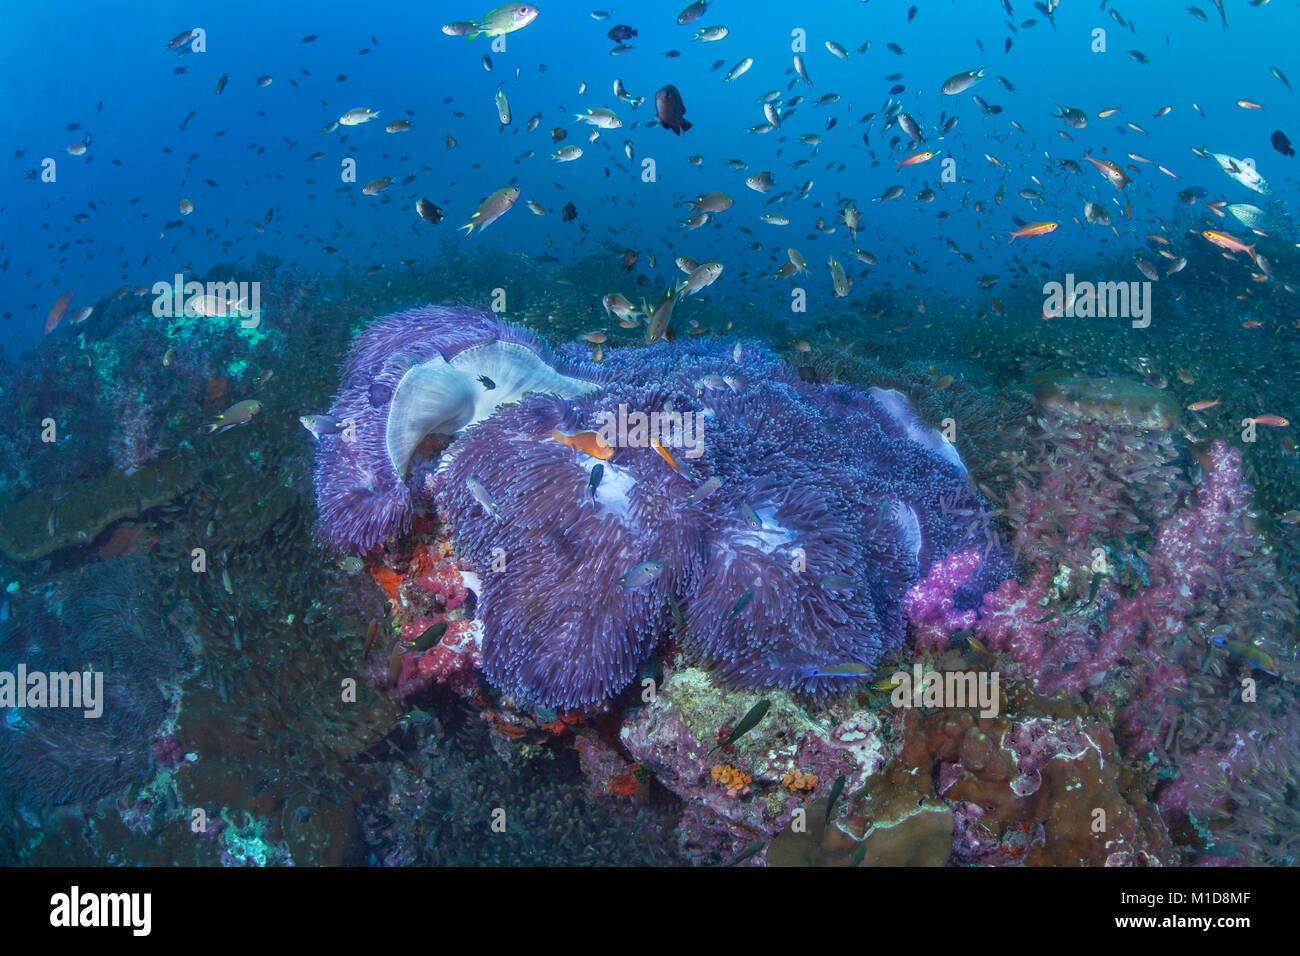 Fish feeding in the current on reef covered with carpet anemones. Richelieu Rock, Andaman Sea, Thailand. Stock Photo